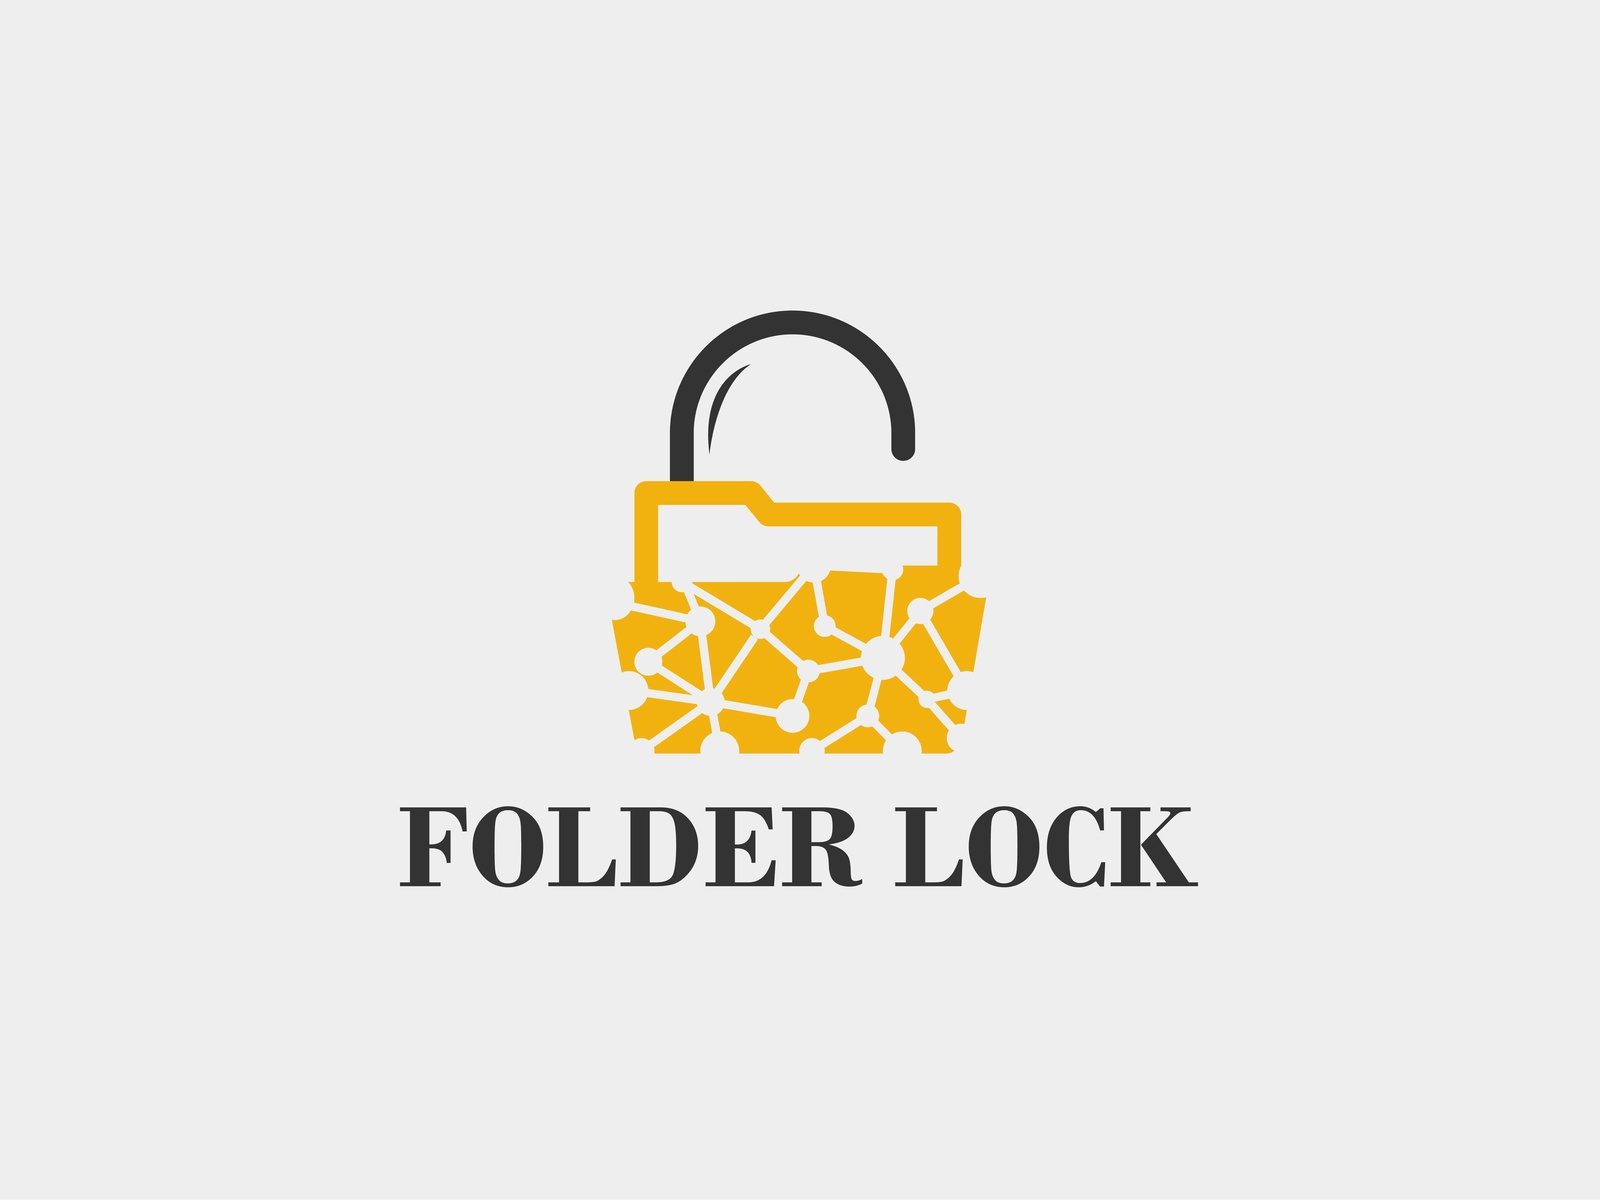 Folder Lock Crack 7.9.2 With Activation Code Free